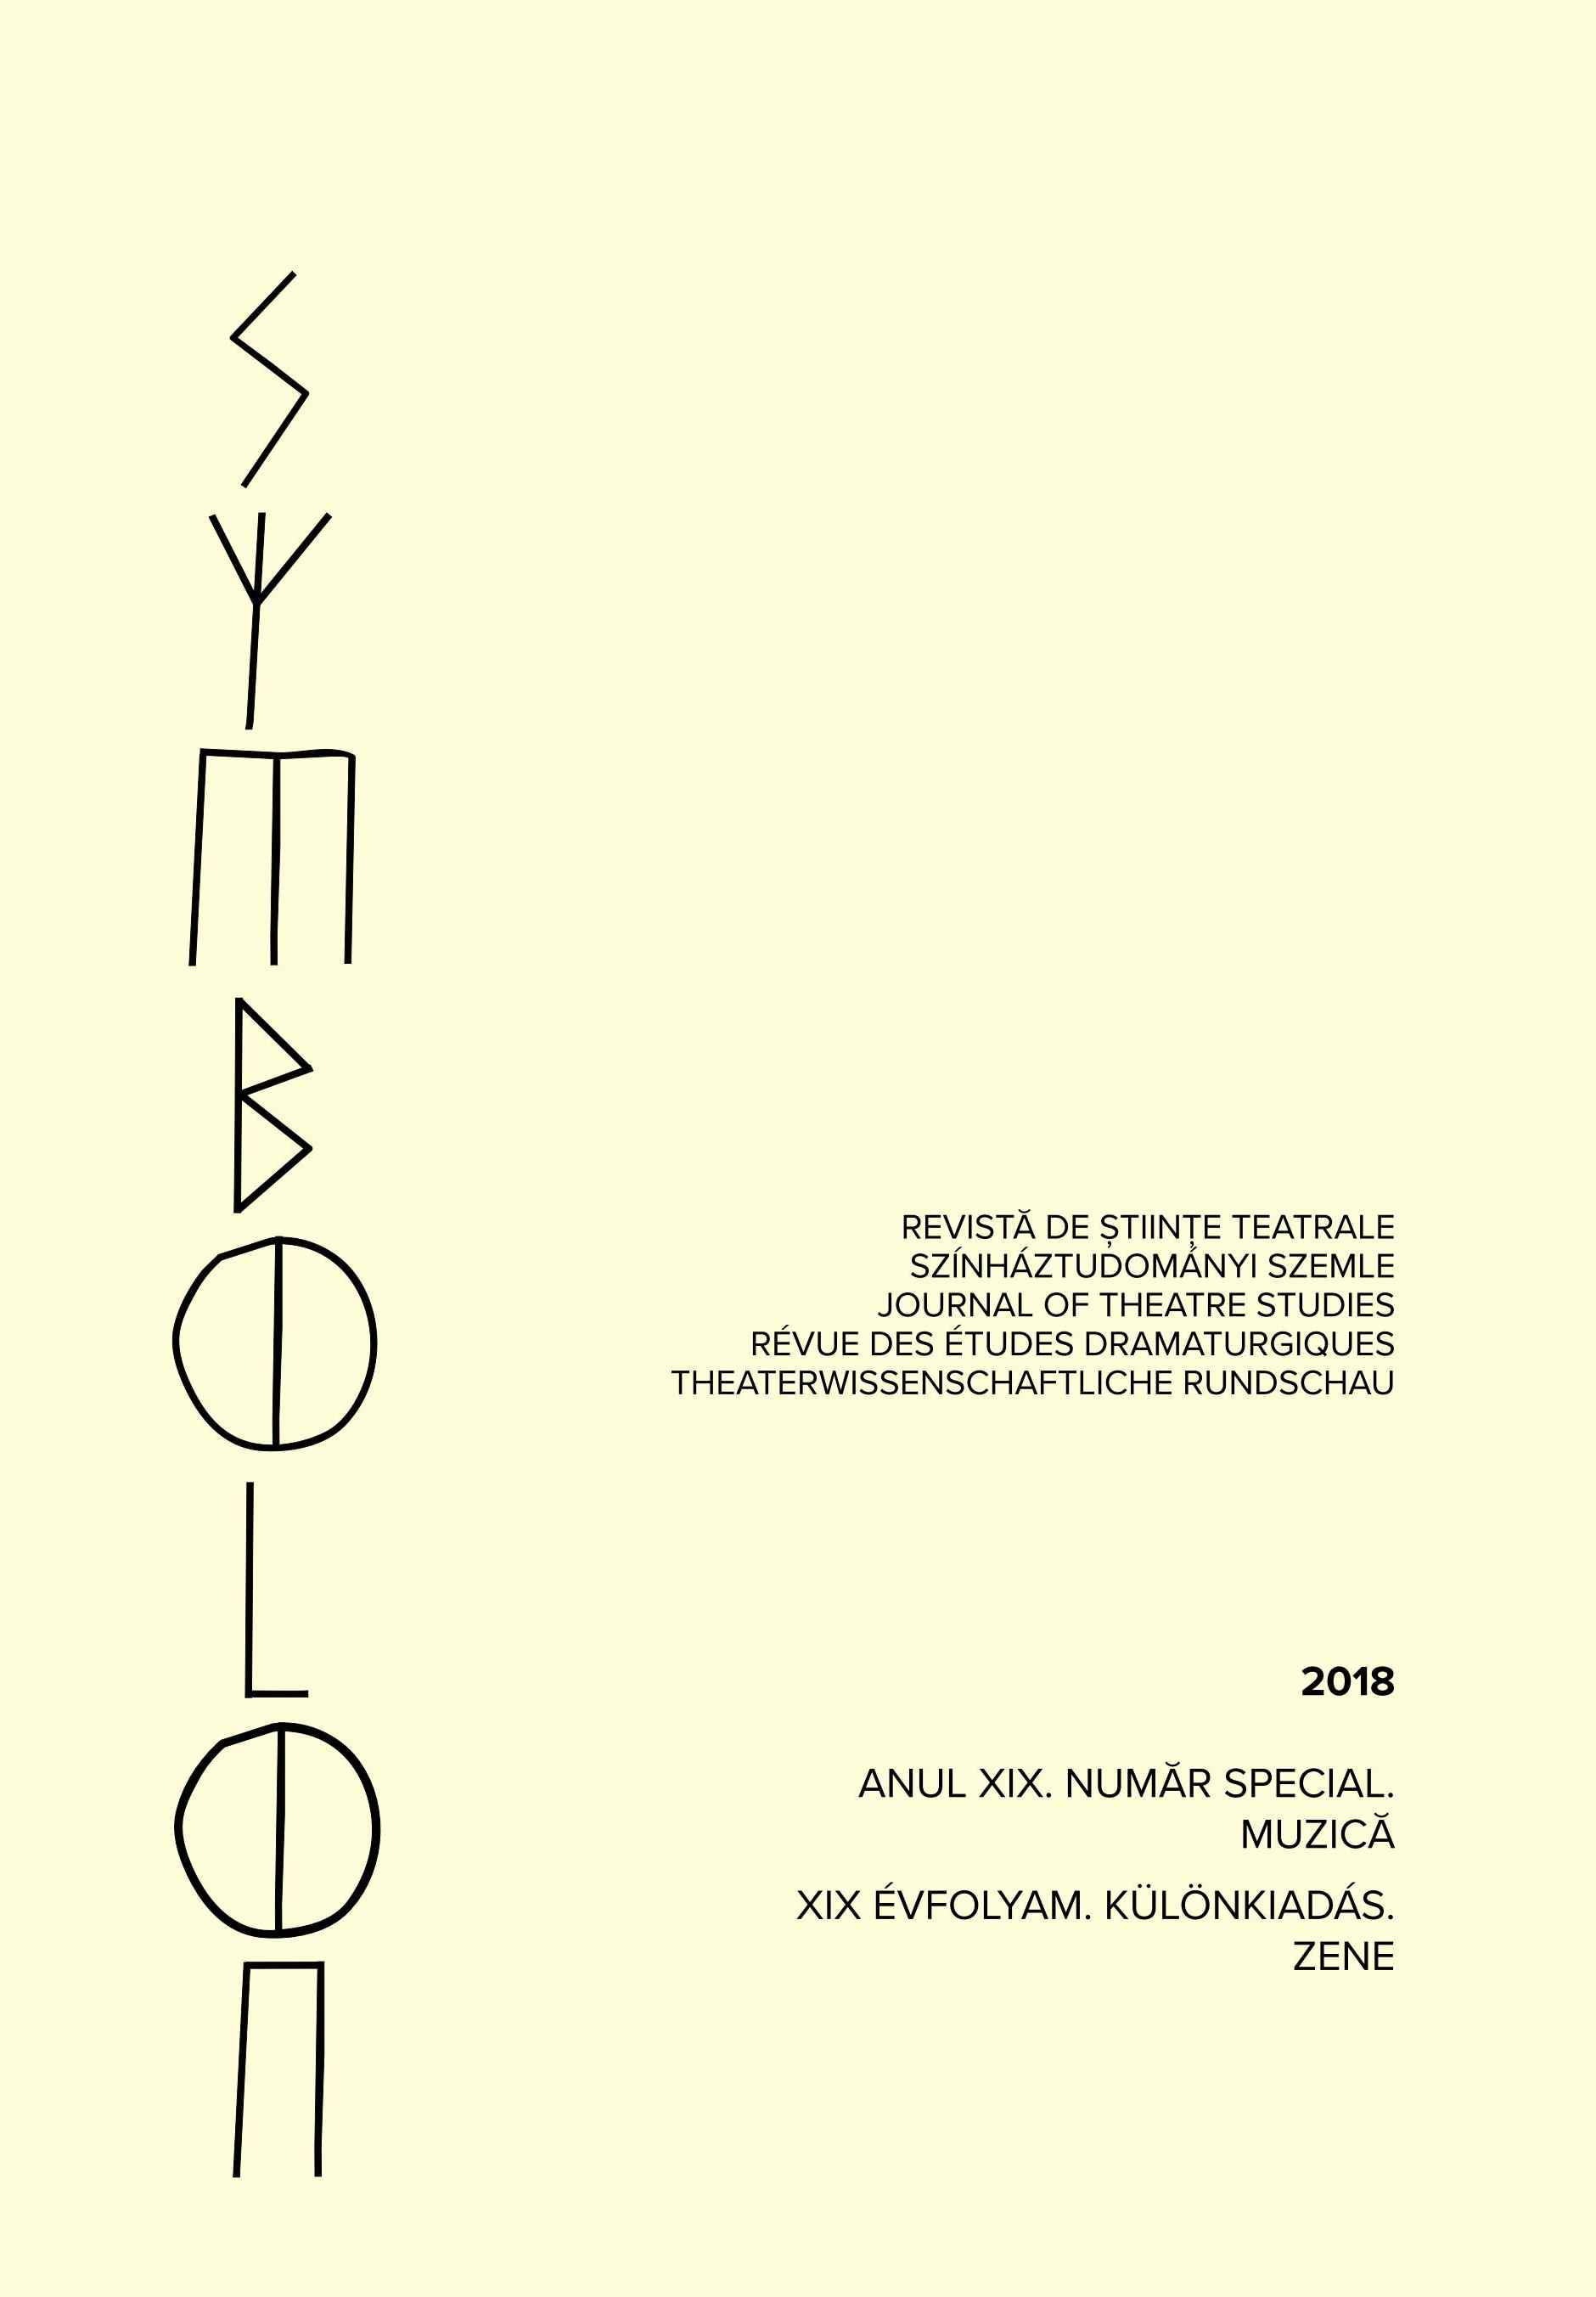 Composition Techniques in Tiberiu Olah’s ”Sonatina for Violin and Piano” Cover Image